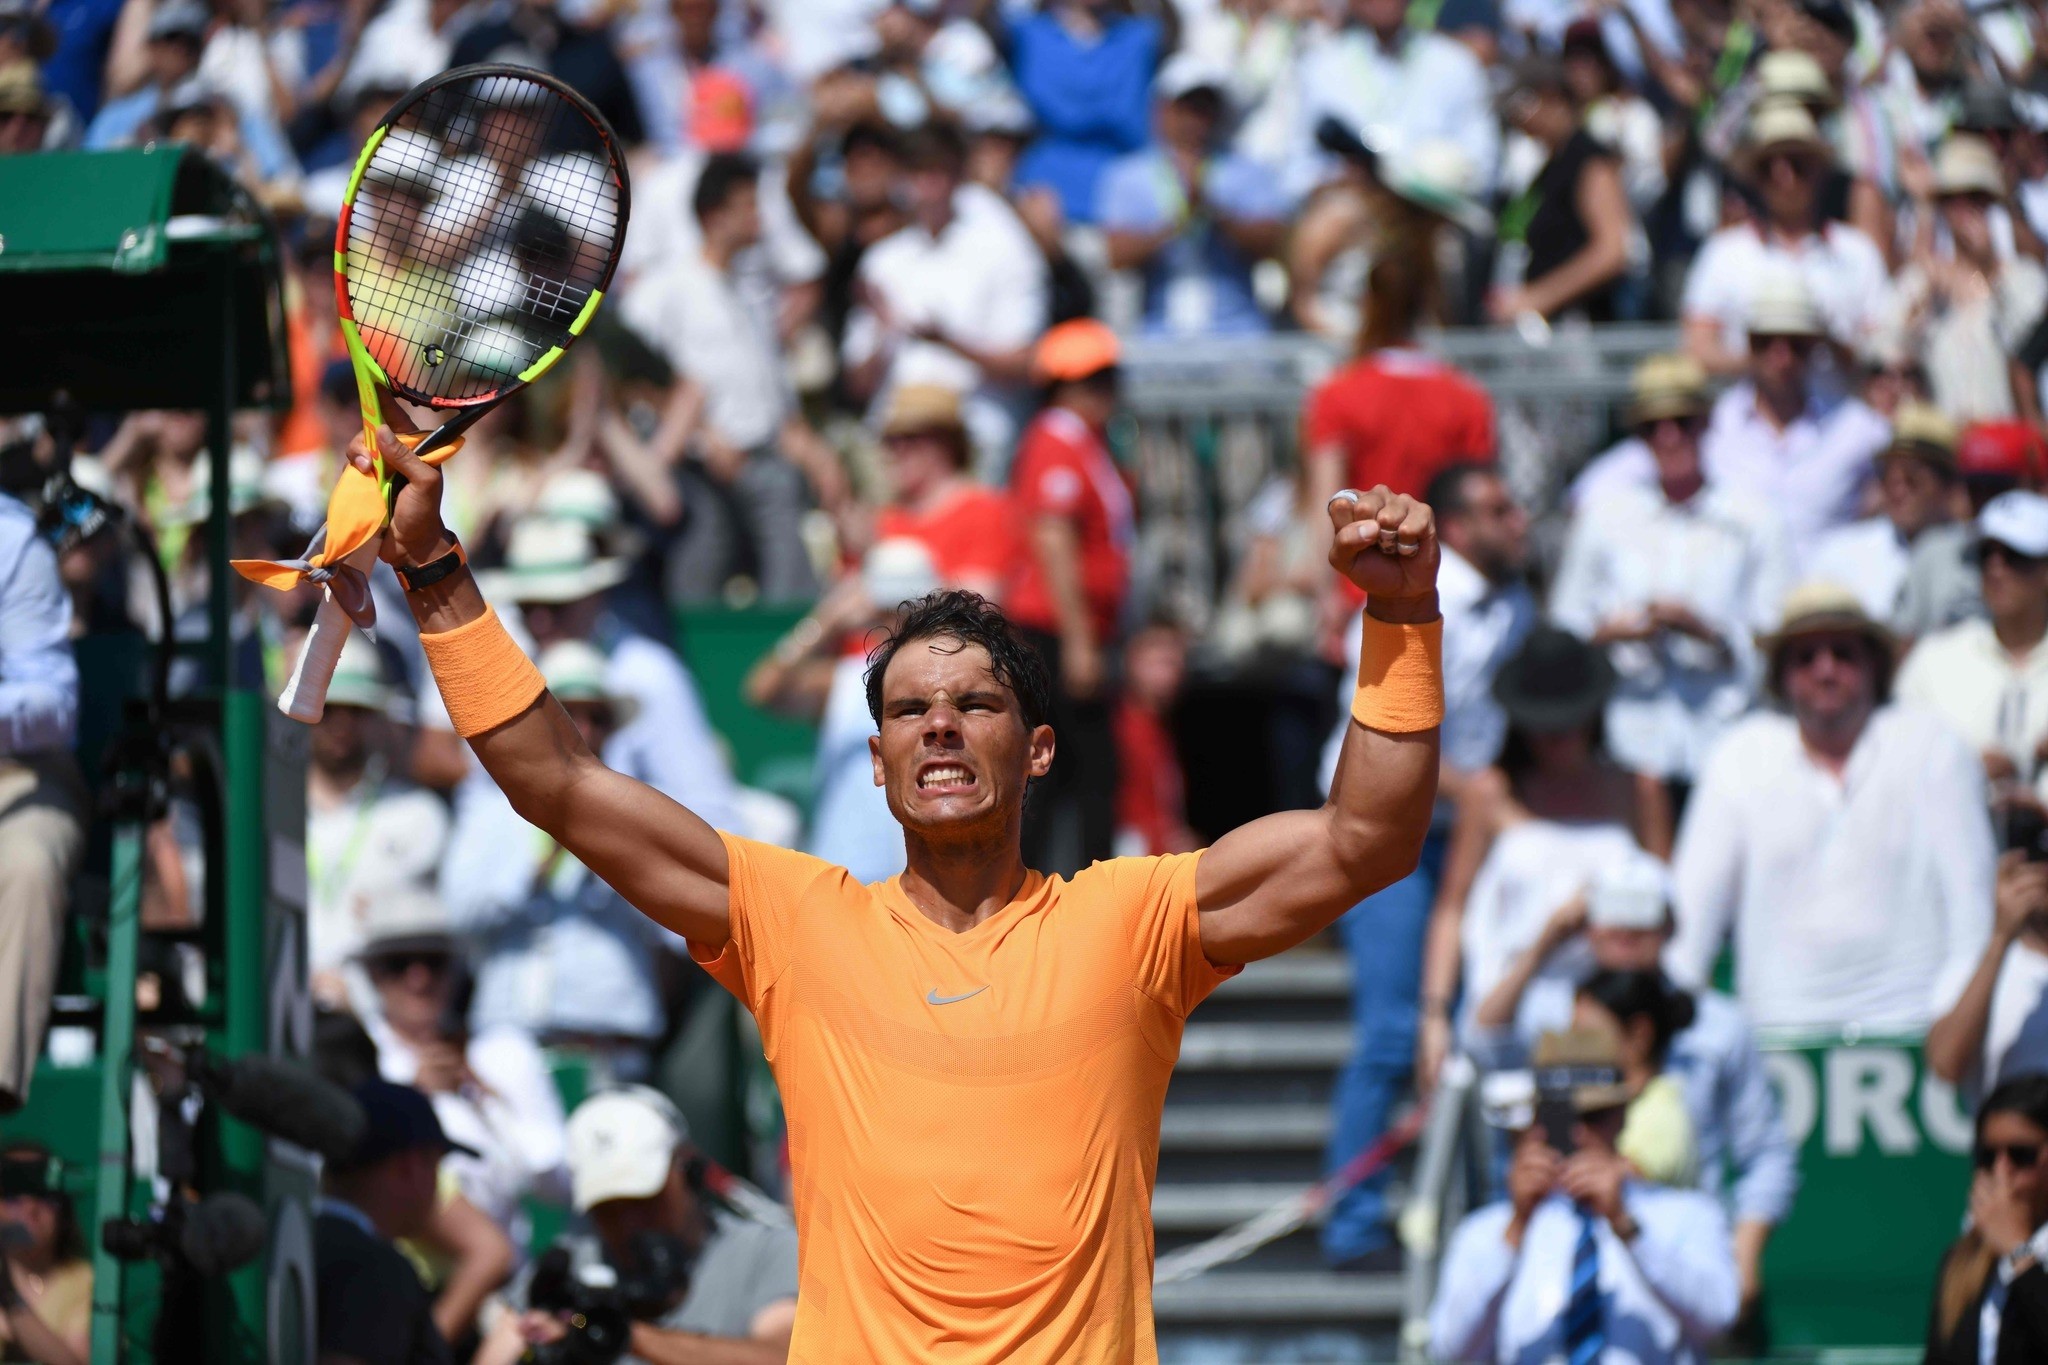 Spain's Rafael Nadal celebrates after his victory against Bulgaria's Grigor Dimitrov during their semi-final match at the Monte-Carlo ATP Masters Series tournament on April 21, 2018 in Monaco. (AFP Photo)